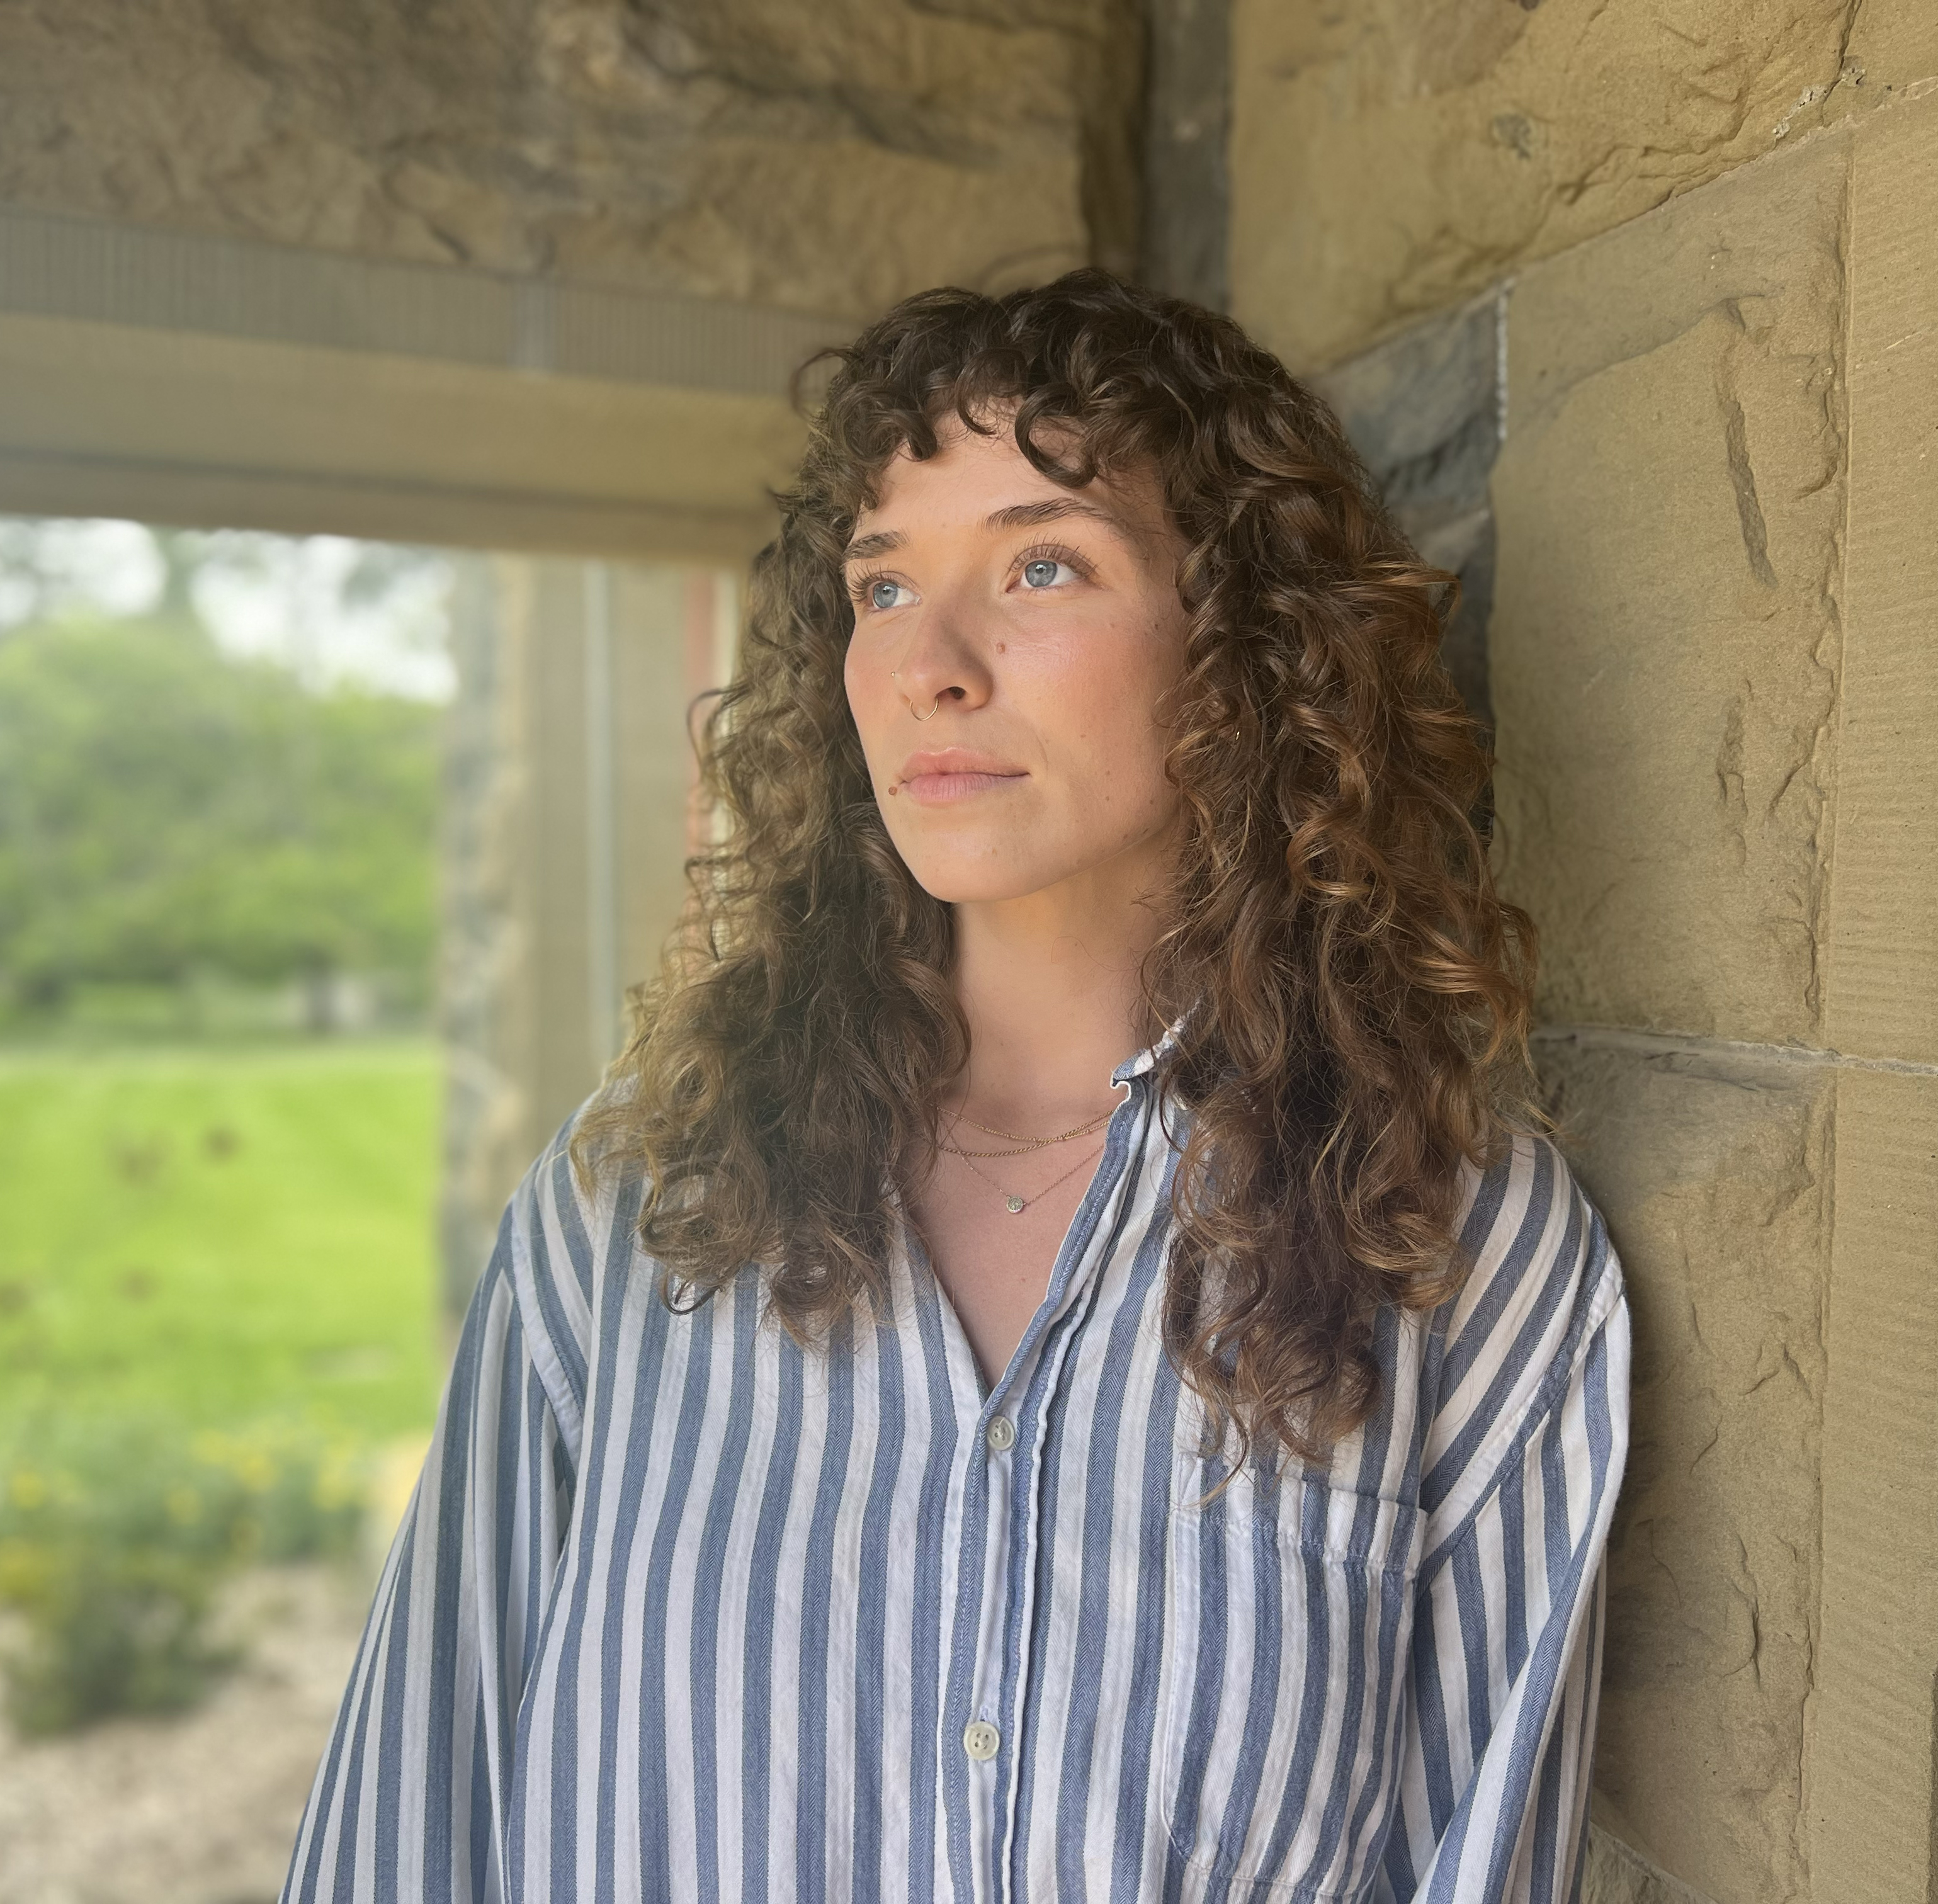 A woman with curly hair, wearing a striped shirt, stands under an archway, looking thoughtfully to the side, with greenery in the background.